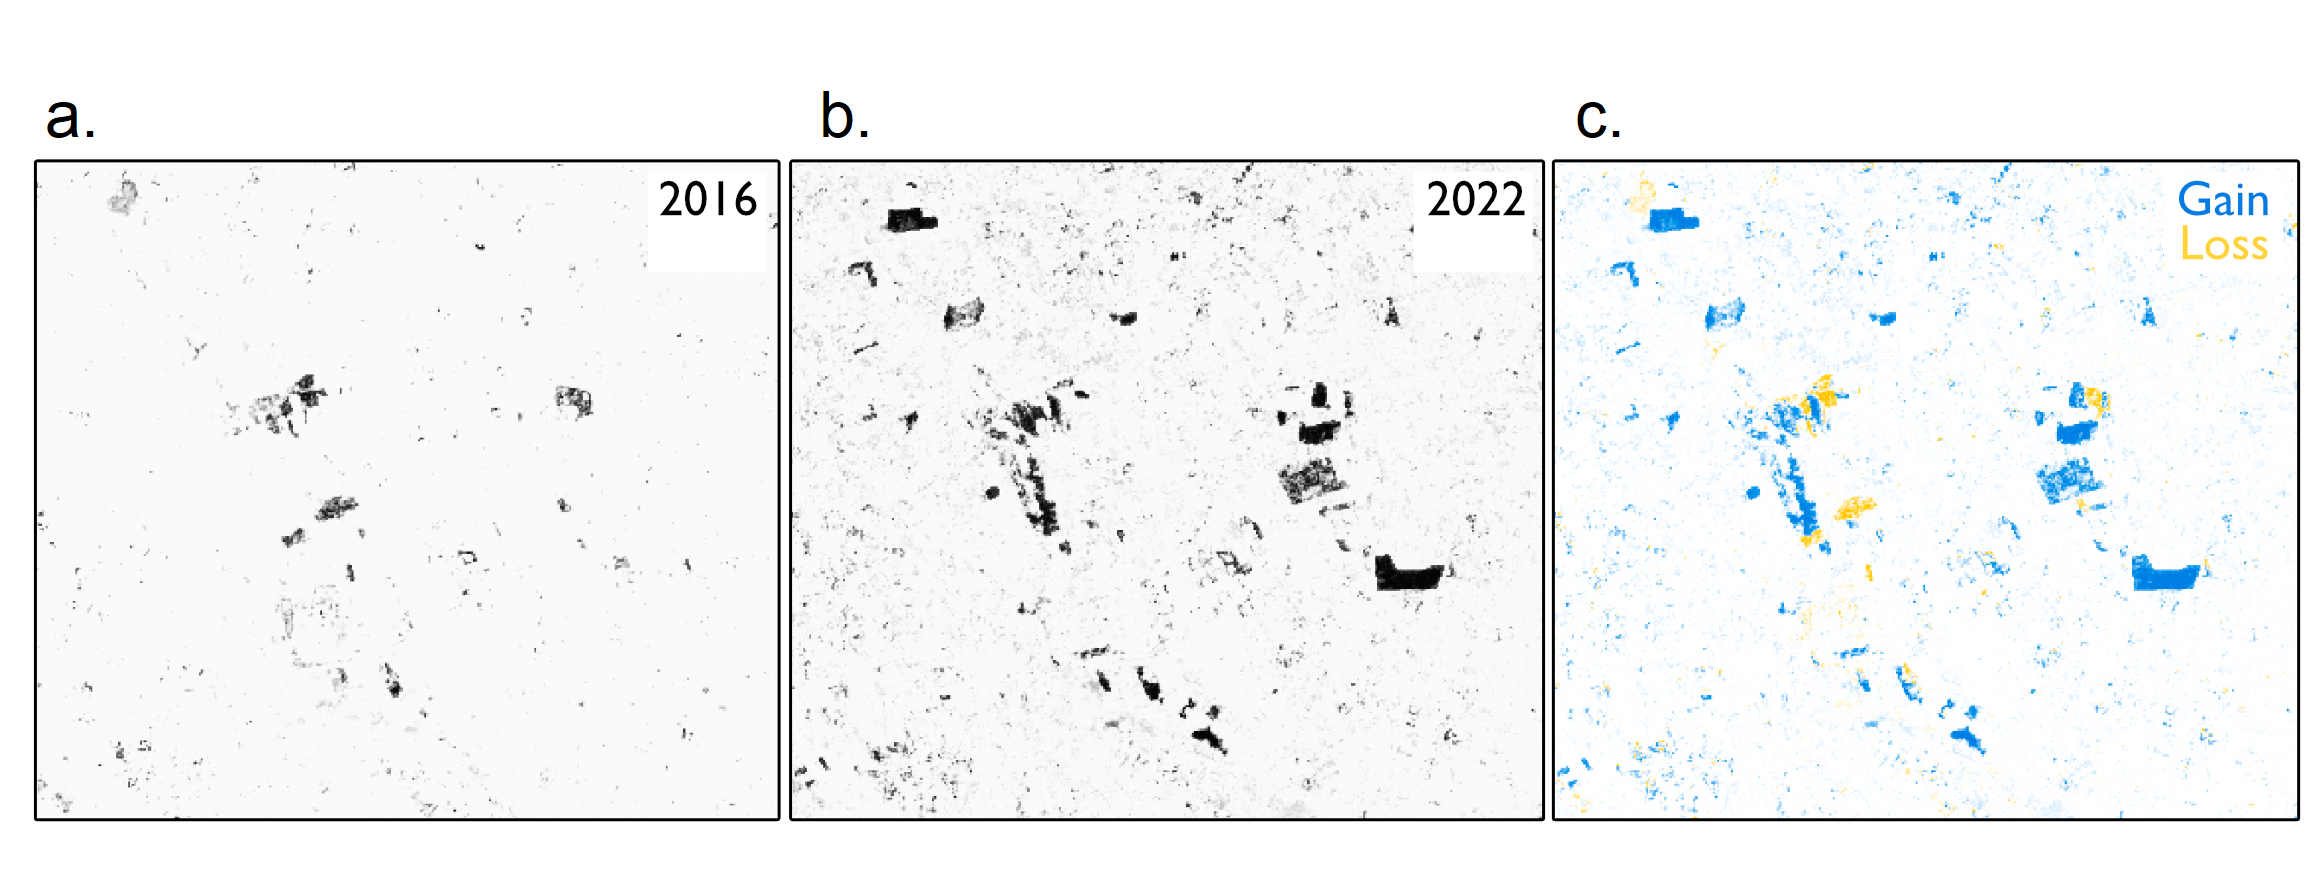 A three-panel image showing the predictions of the model from 2016 and 2022 images for the same location. The left image shows predictions from the model for 2016, indicating some small areas of trees. The centre image shows predictions from the model for 2022, indicating a greater number of tree areas. The right image shows the difference between model predictions between 2016 and 2022, showing there has been more areas of tree gain than tree loss.